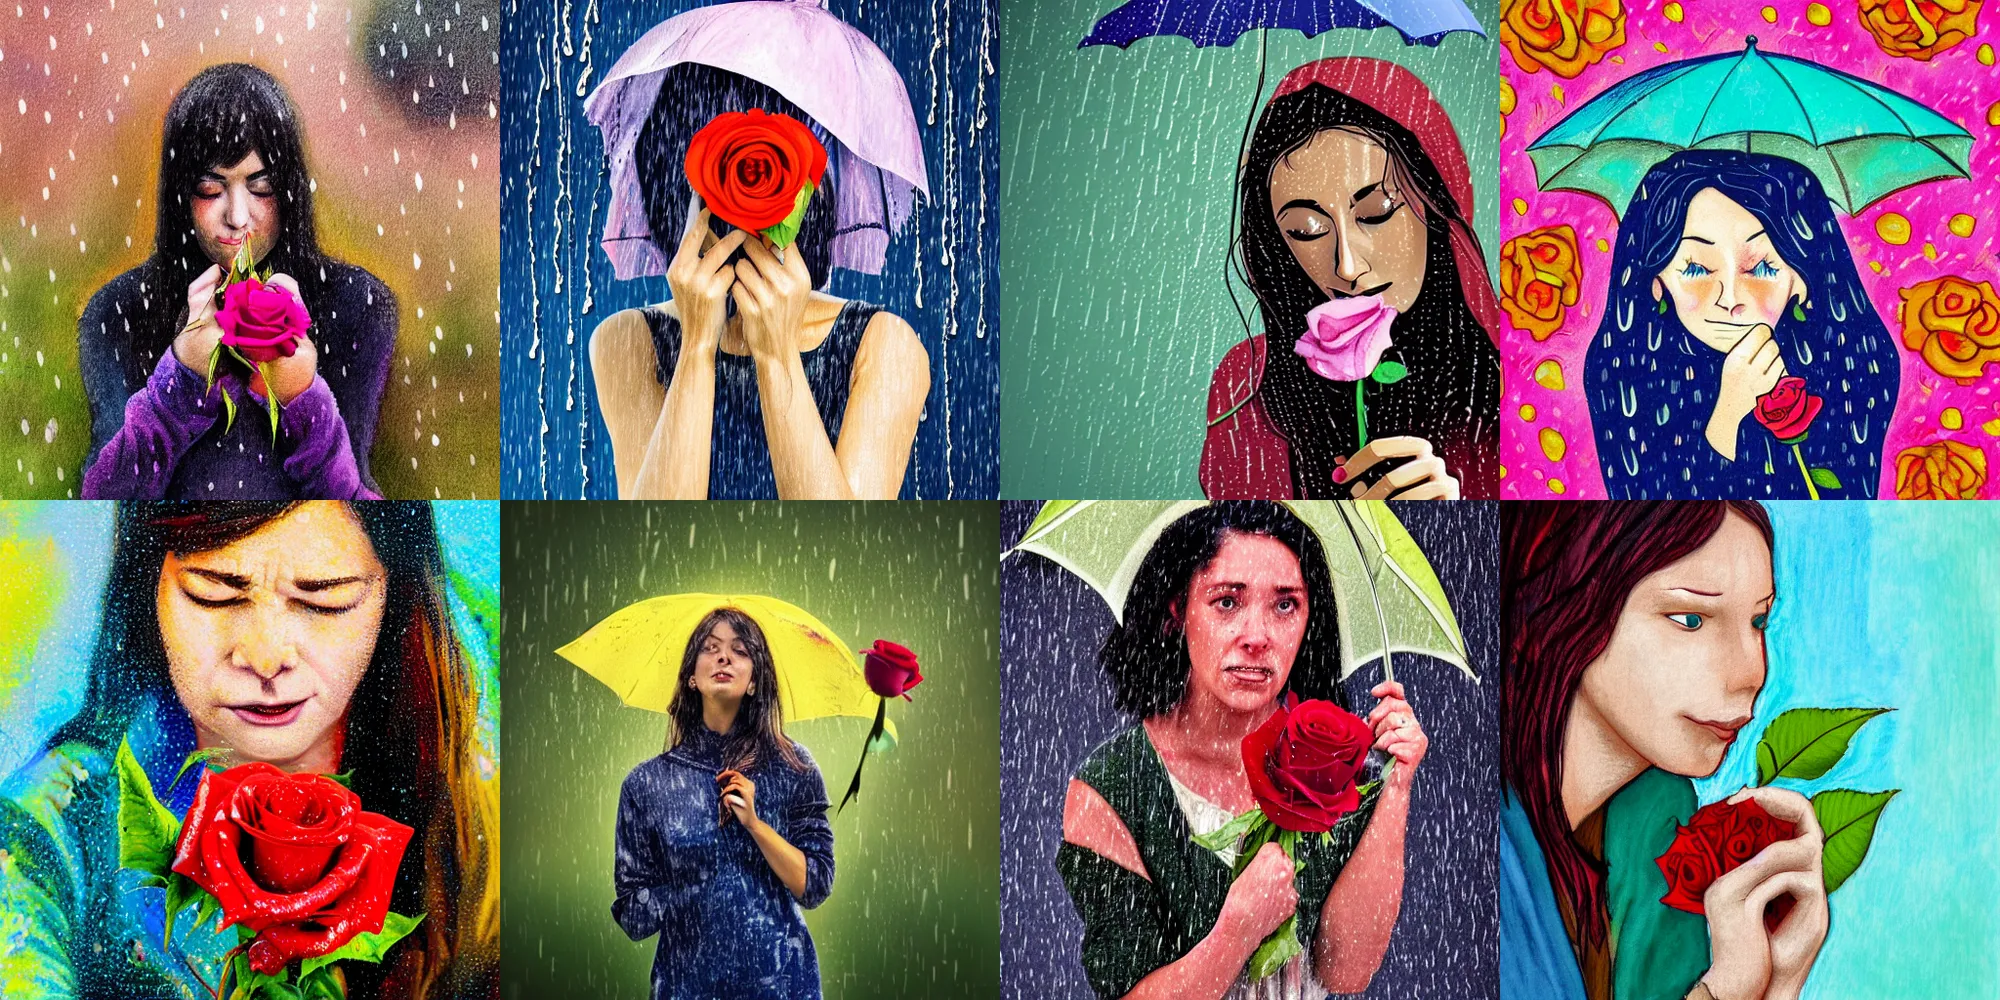 Prompt: a photograph of a teary - eyed women clutching a rose in the rain, photorealistic, vibrant colours